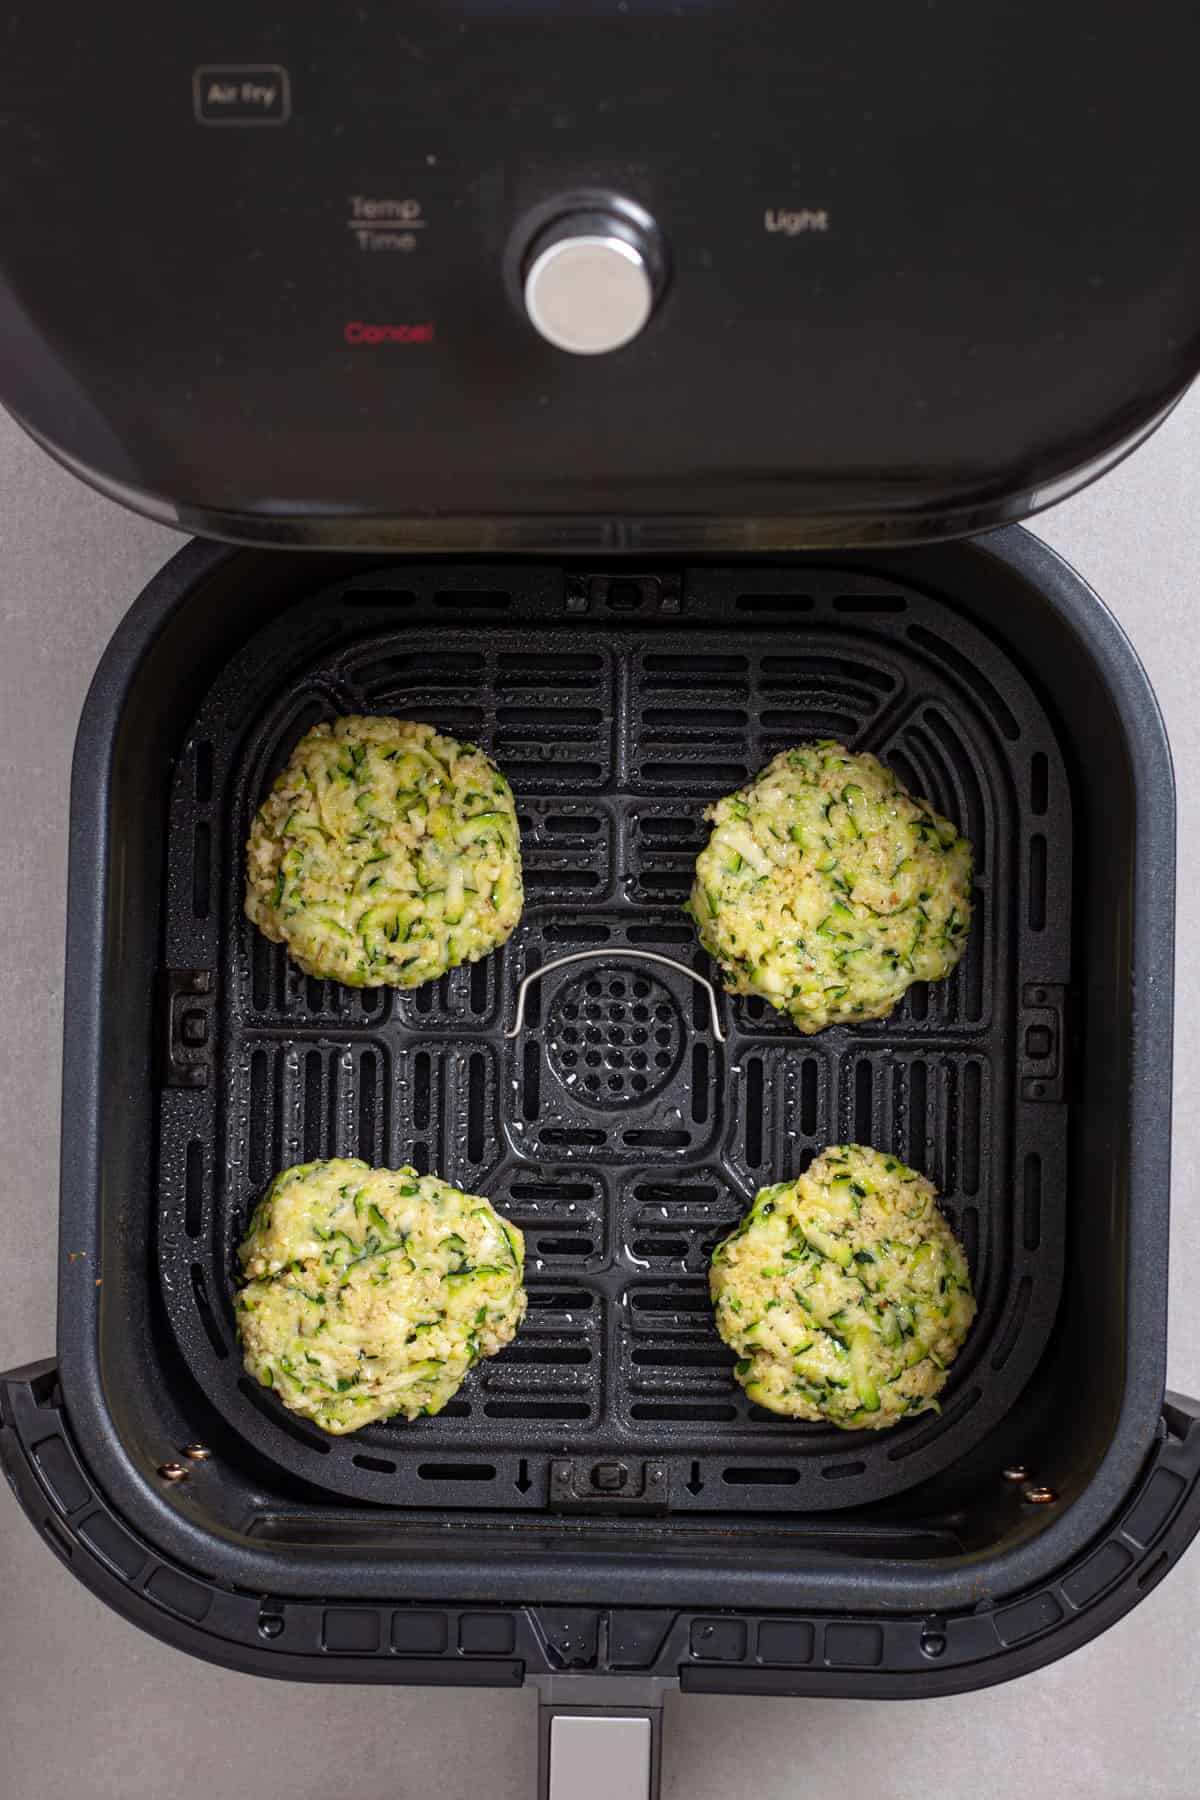 Zucchini patties in a basket of an air fryer ready to get cooked.